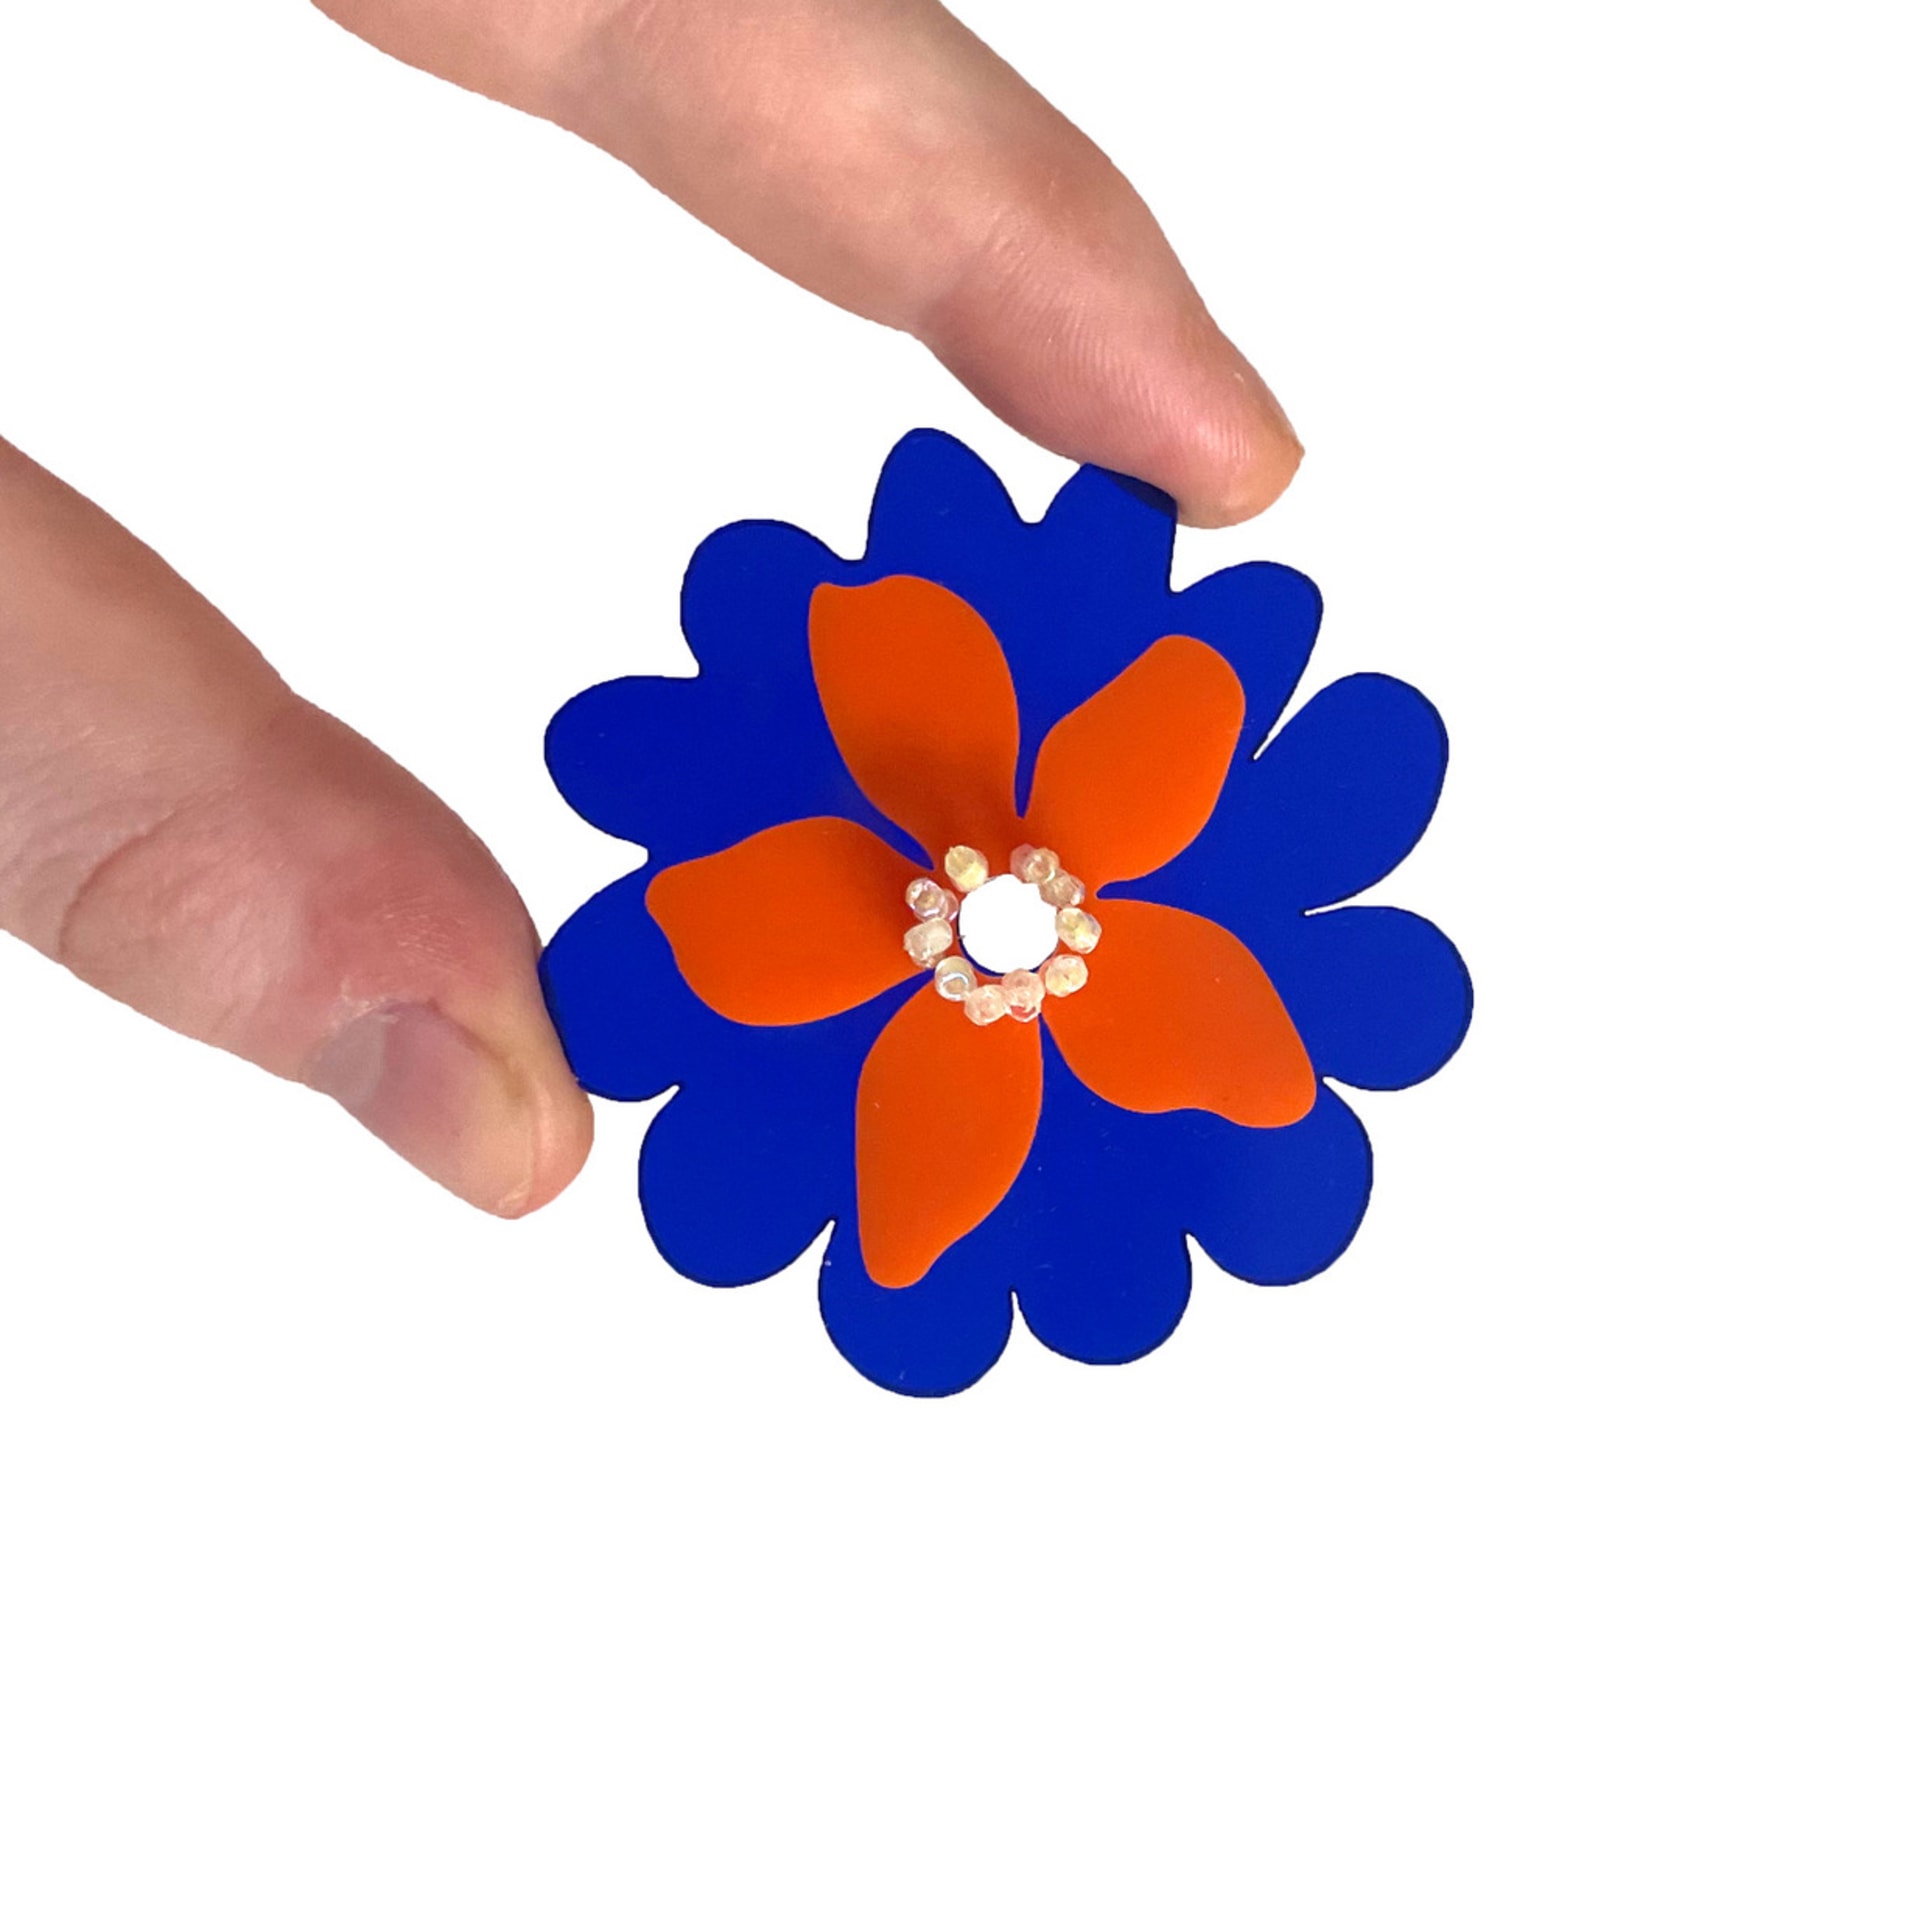 Abstract flower motif laser cut out of acrylic plastic. Two layers to this shape, the back royal blue, the front burnt orange.